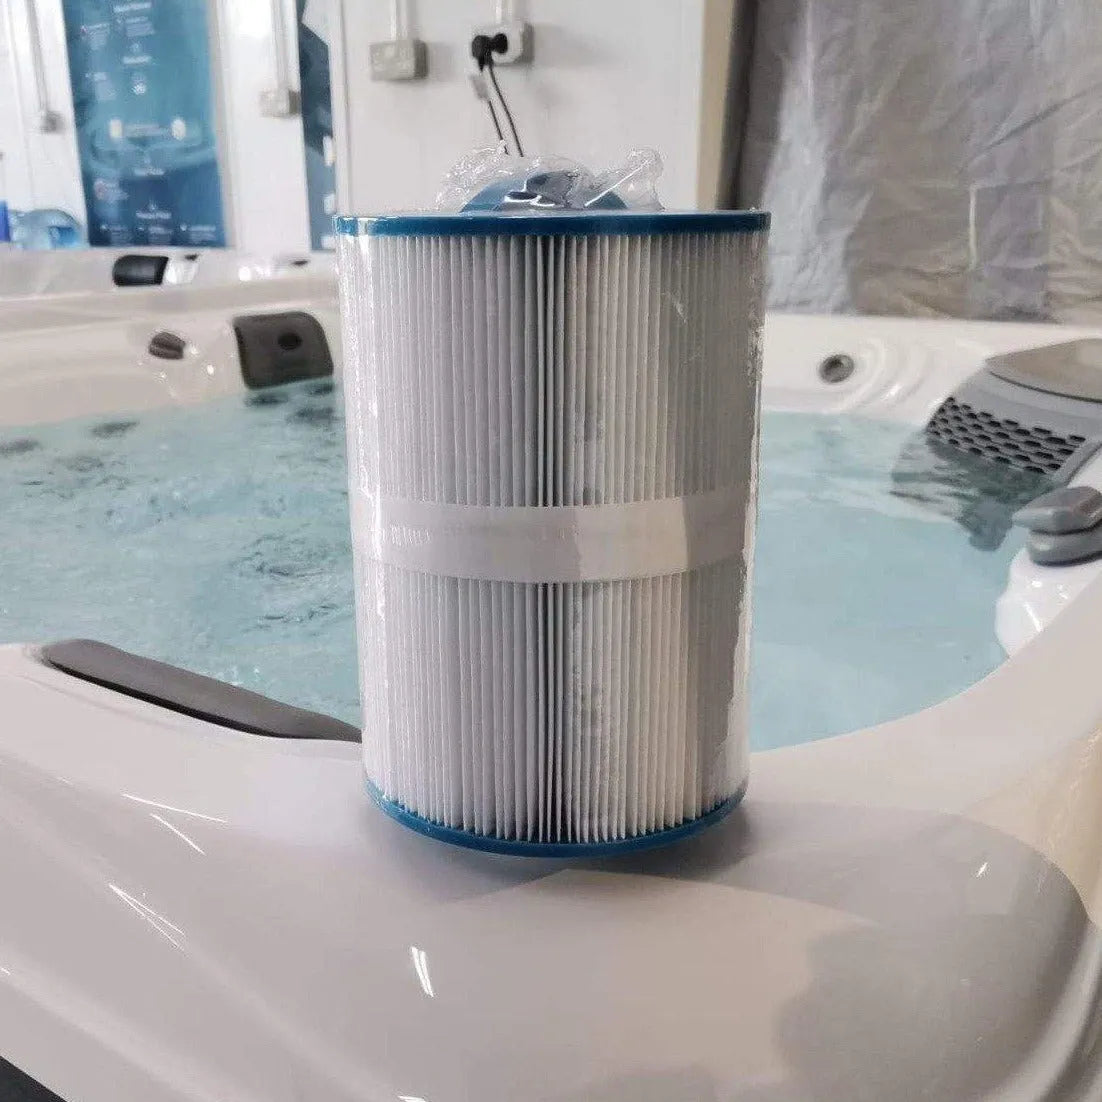 A cylindrical LHT Filter - Medium by Hot Tub Liverpool with blue end caps stands upright on the edge of a hot tub, emphasizing the importance of hot tub maintenance. The hot tub is filled with water, and a wall with a power outlet is visible in the background. The filter, wrapped in clear plastic, suggests readiness for annual filter replacement.